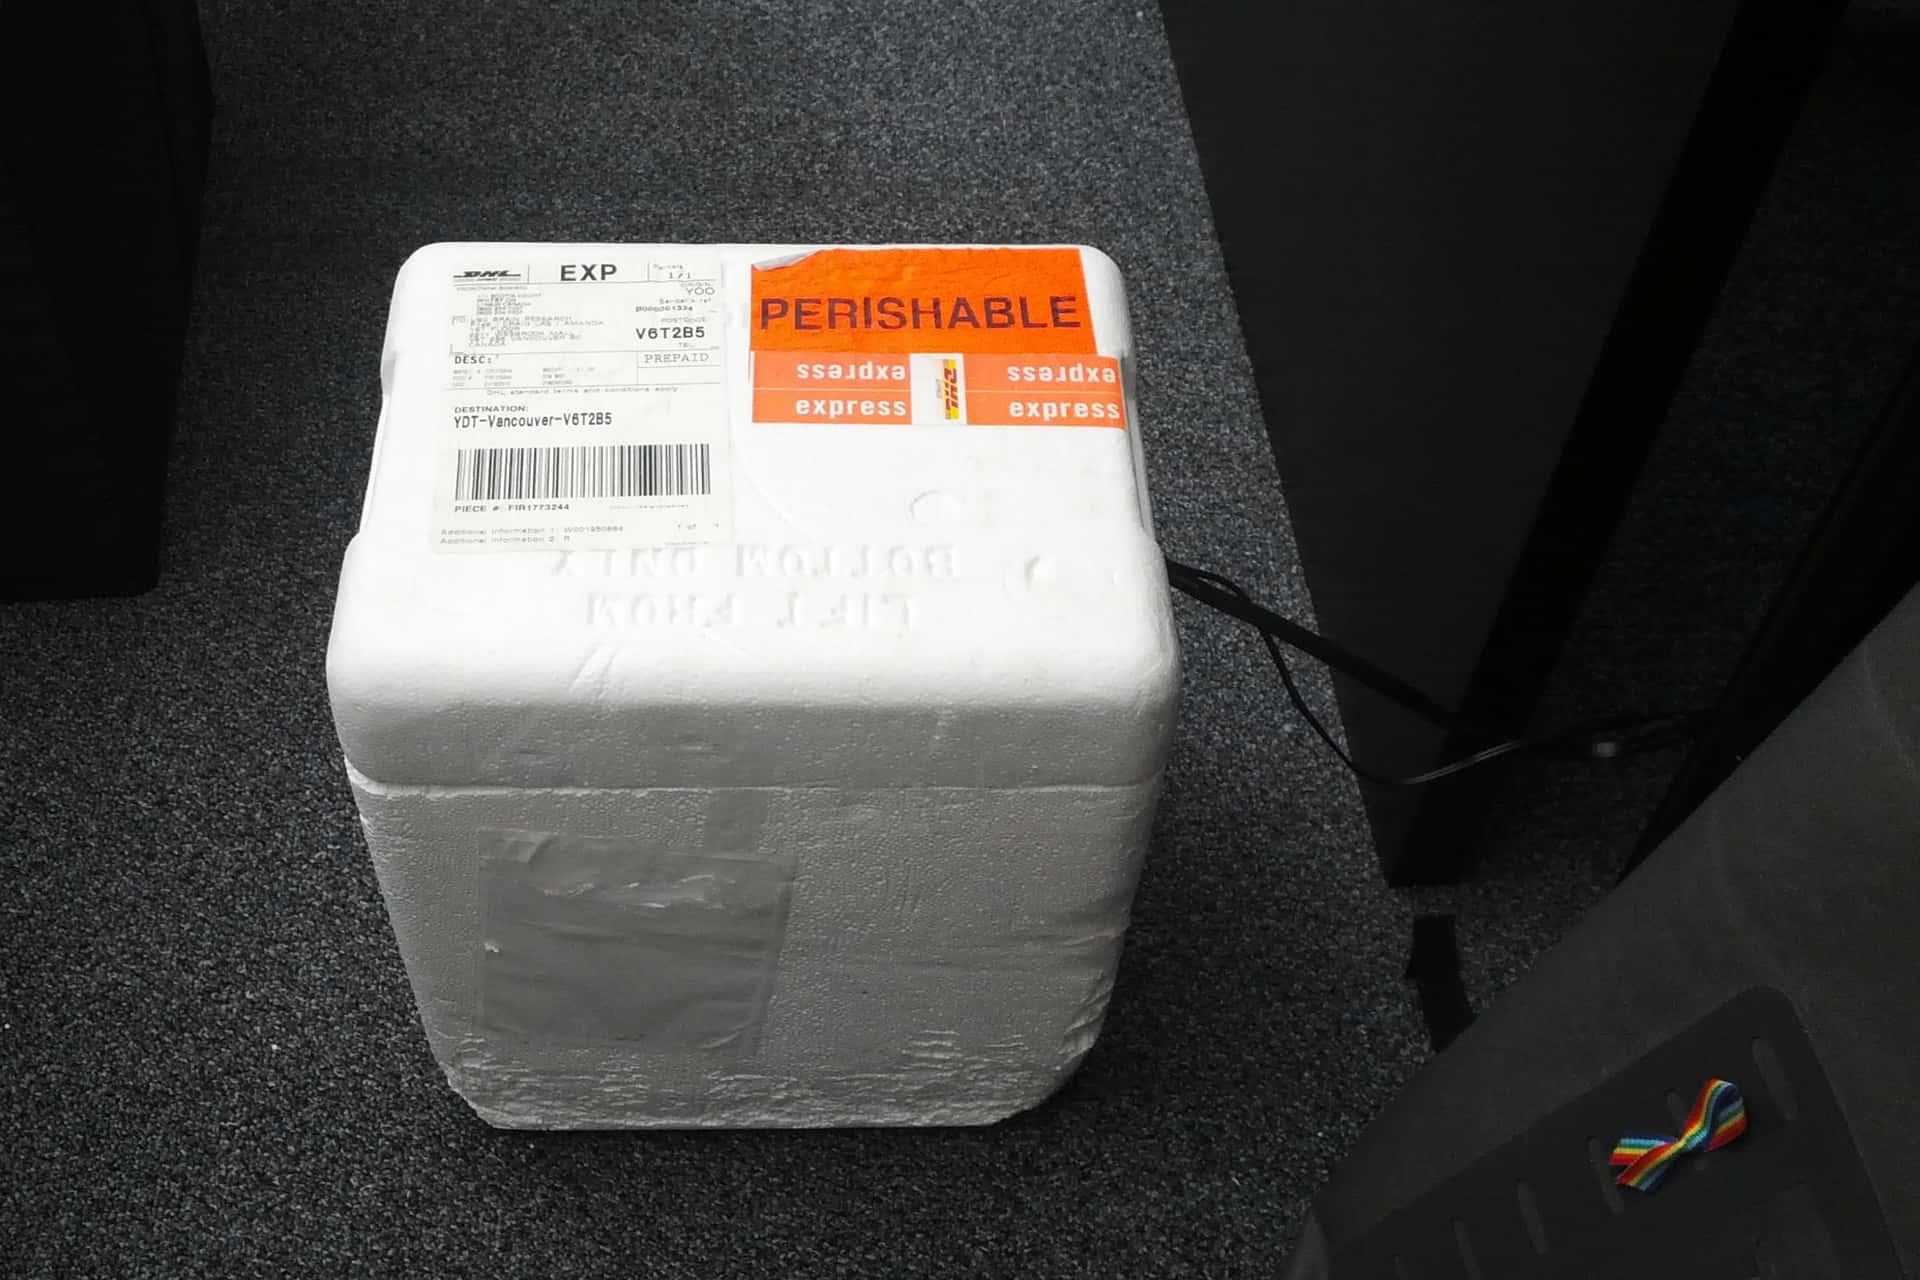 failed hard drive on ice in a styrofoam container connected via eSATA